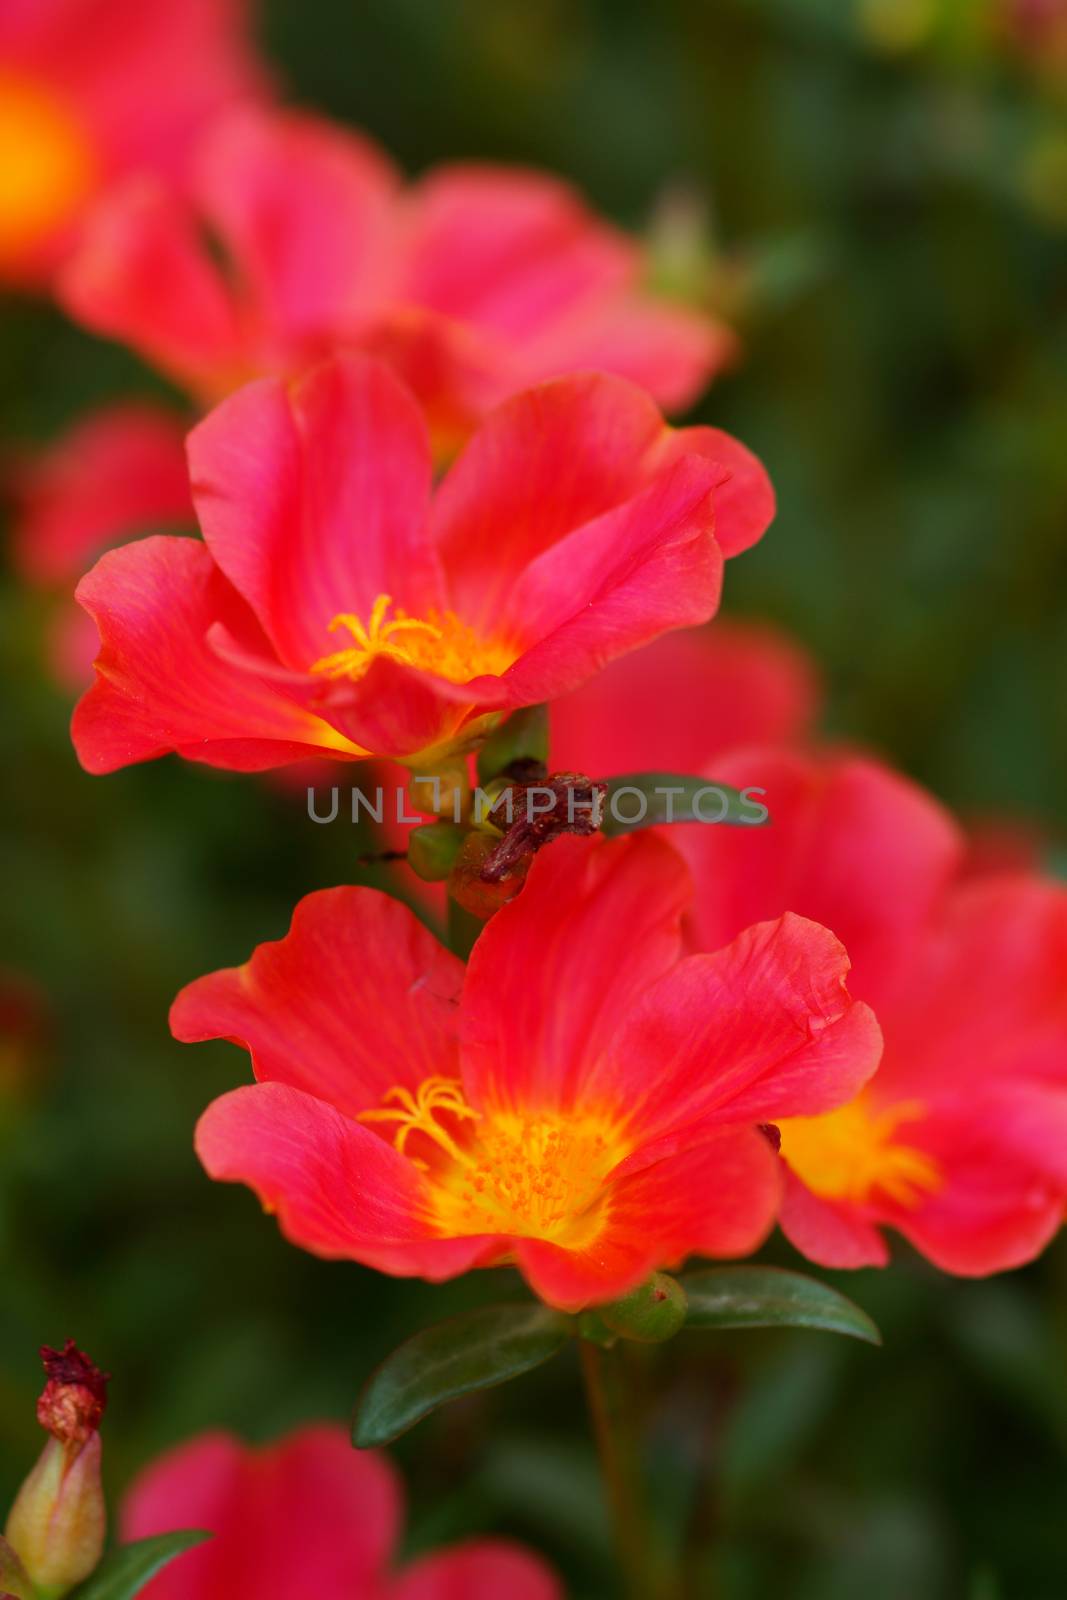 Red Portulaca flowers at the garden. by Noppharat_th